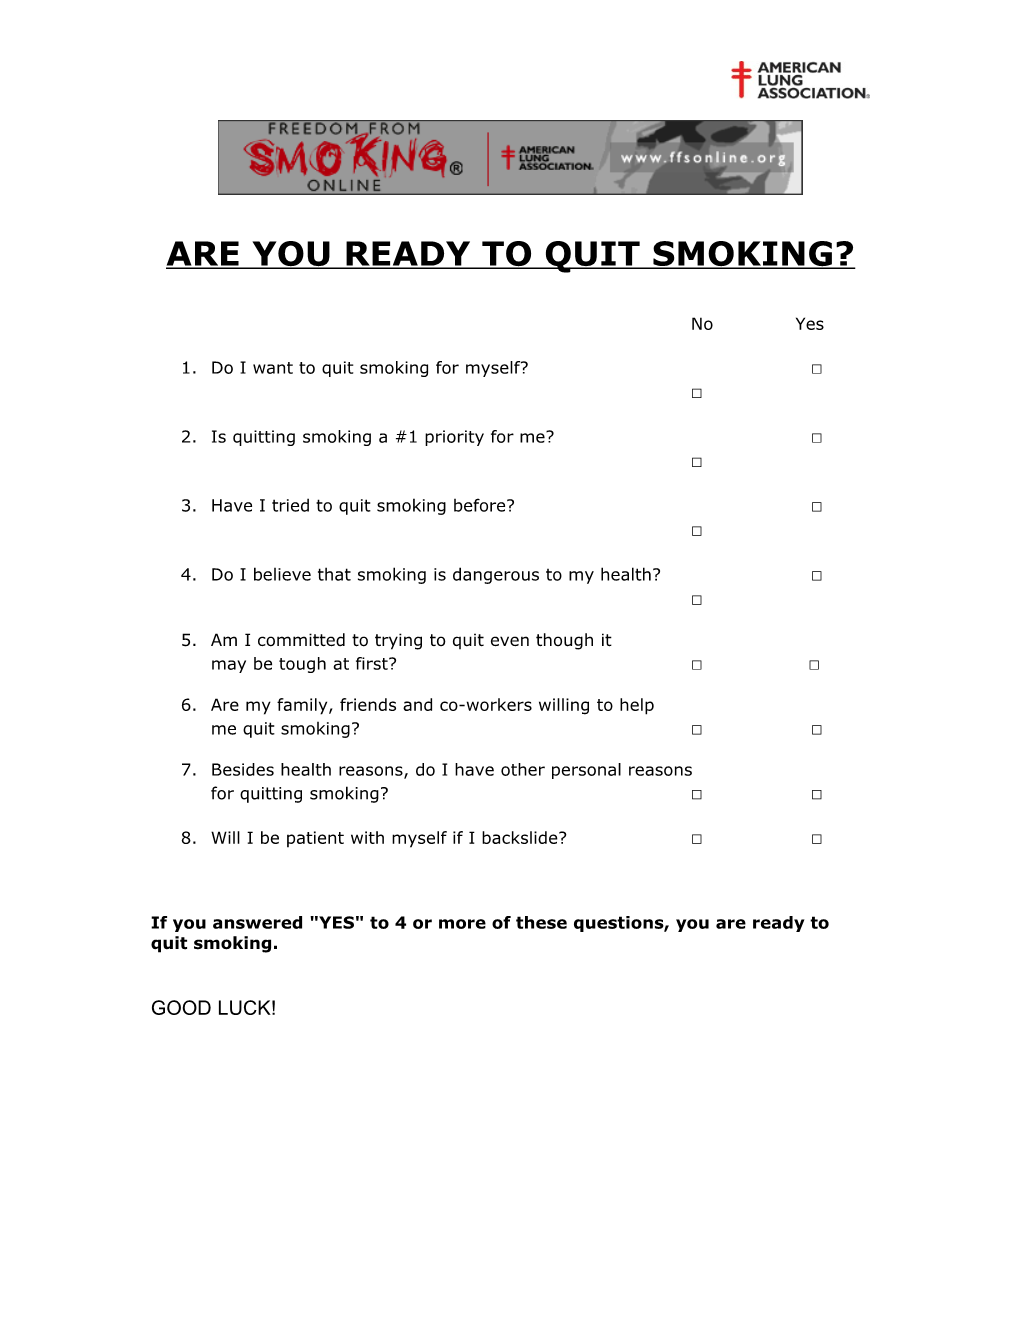 Are You Ready to Quit Smoking